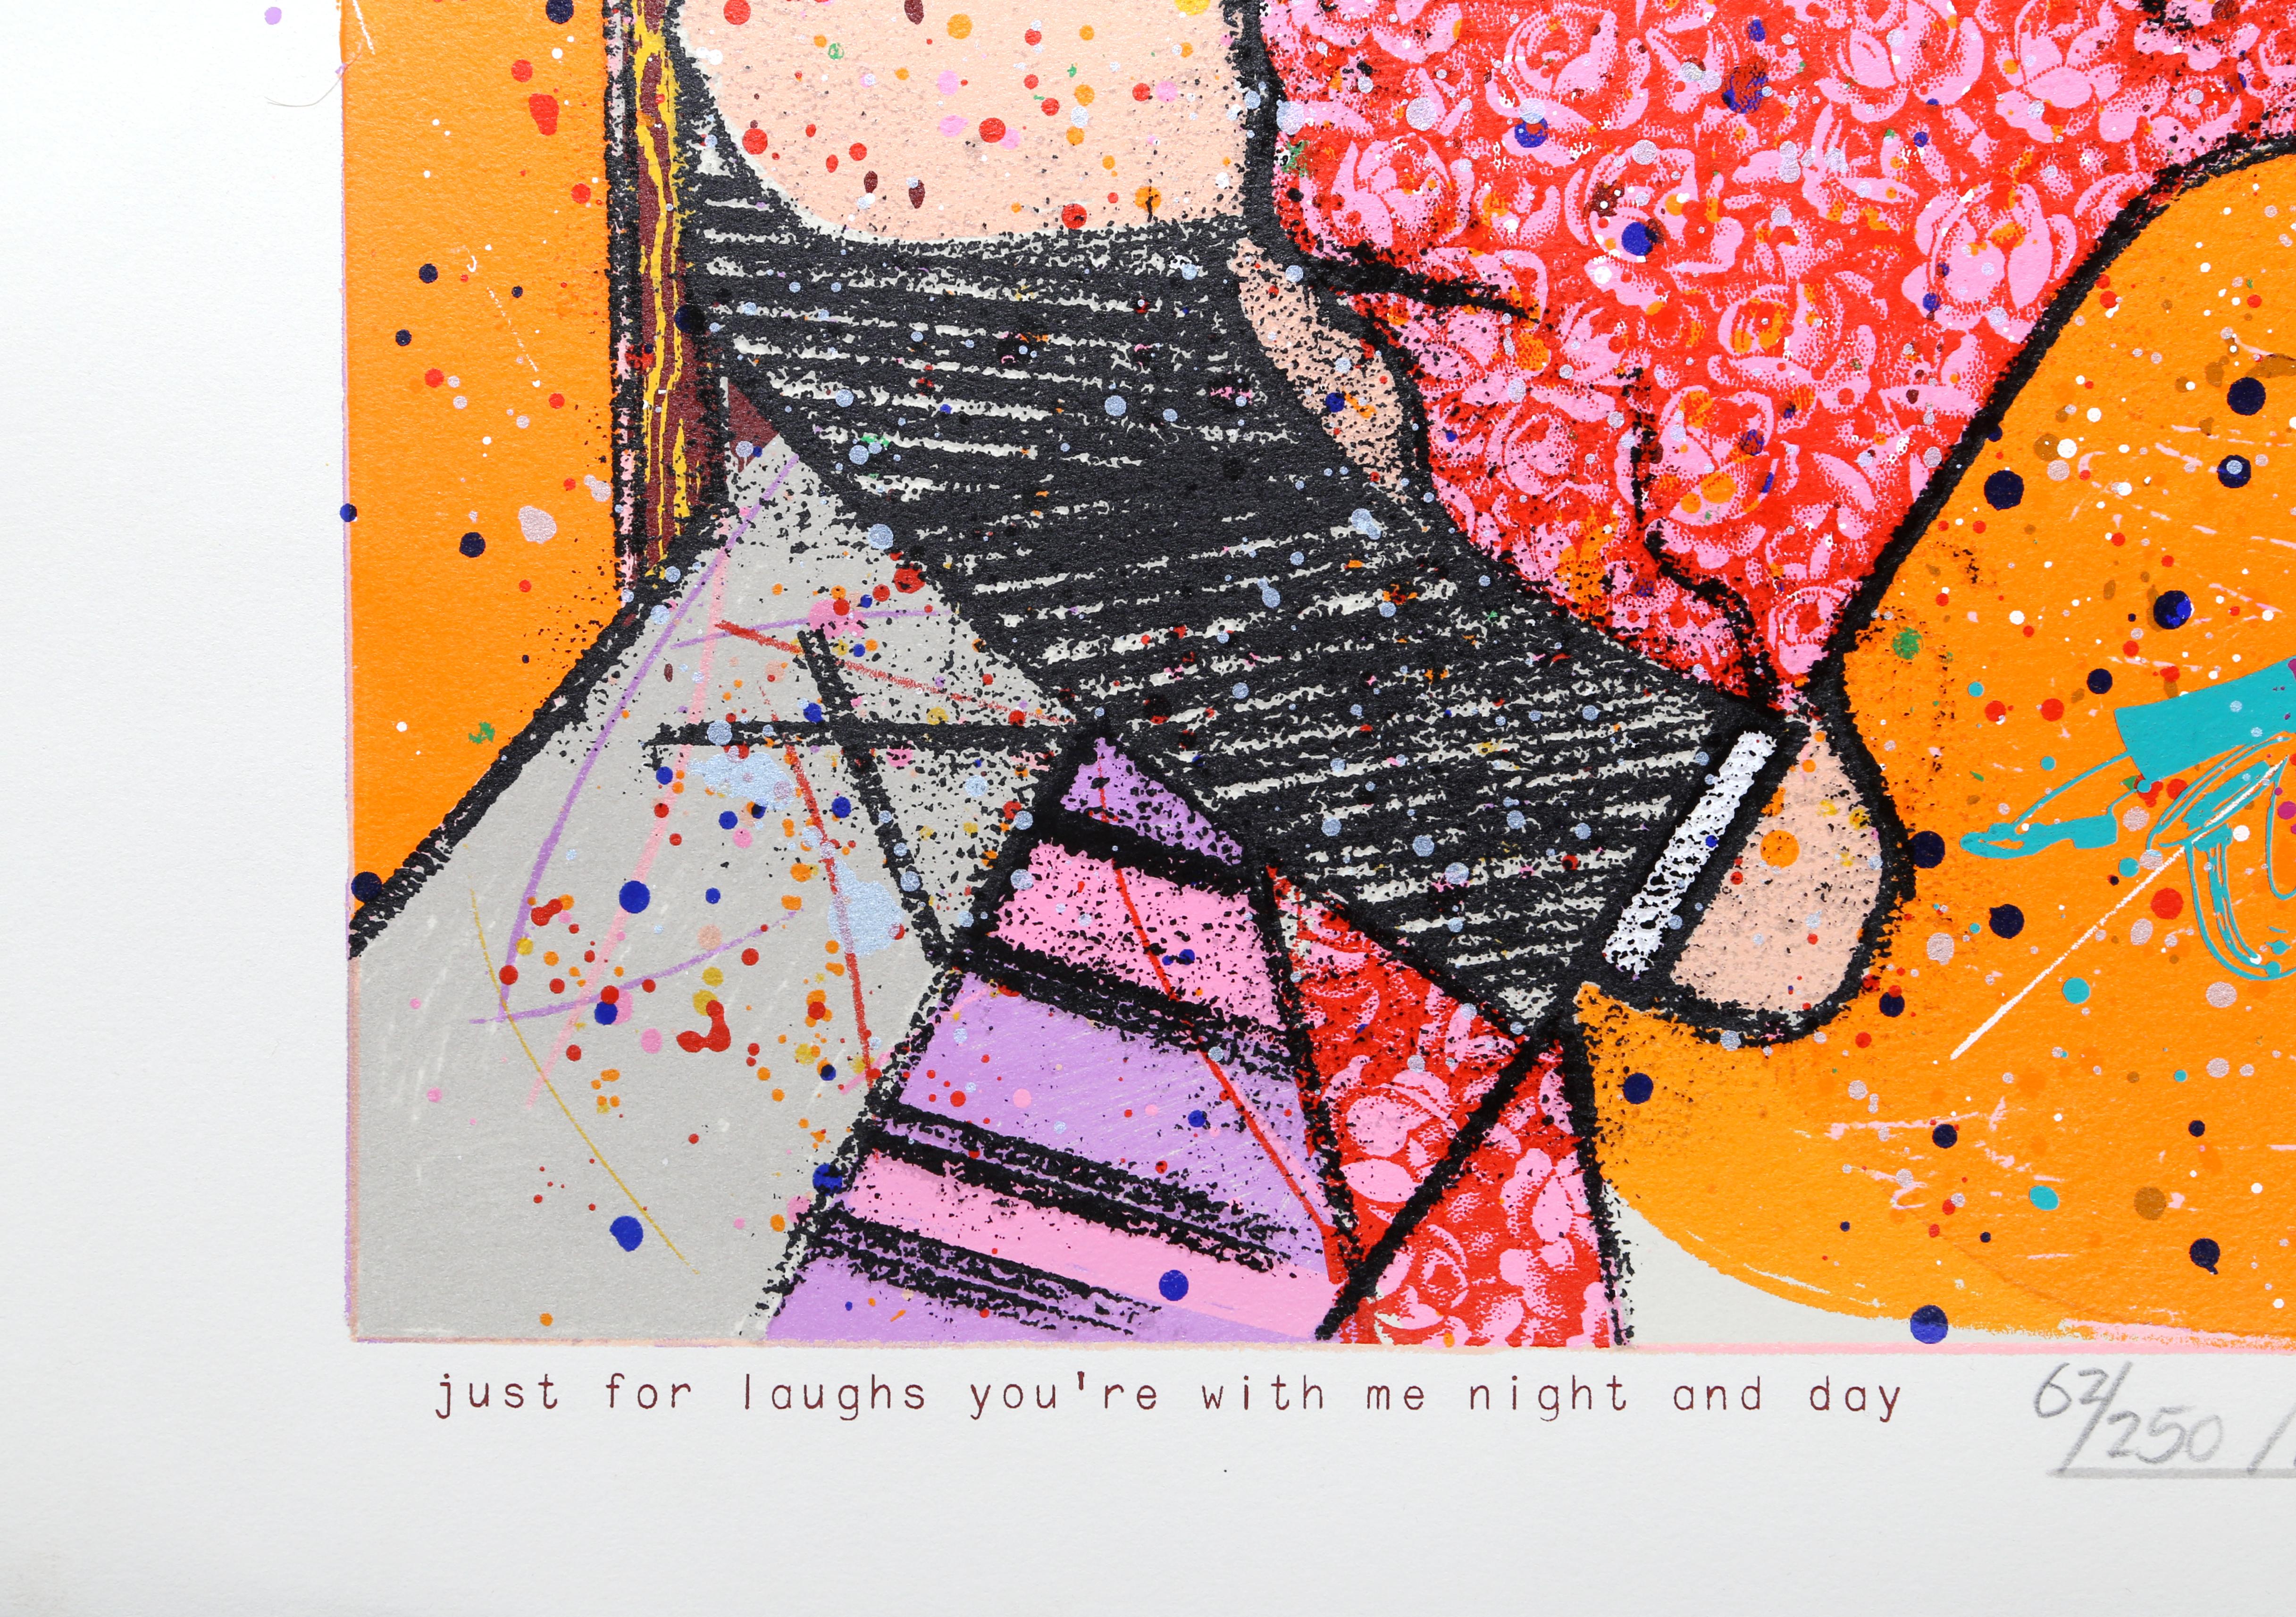 Just For Laughs You're With Me Night and Day by Richard Merkin, American (1938–2009)
Screenprint, signed and numbered in pencil
Edition of 62/250
Image Size: 18 x 24.25 inches
Size: 21.75 x 30 in. (55.25 x 76.2 cm)